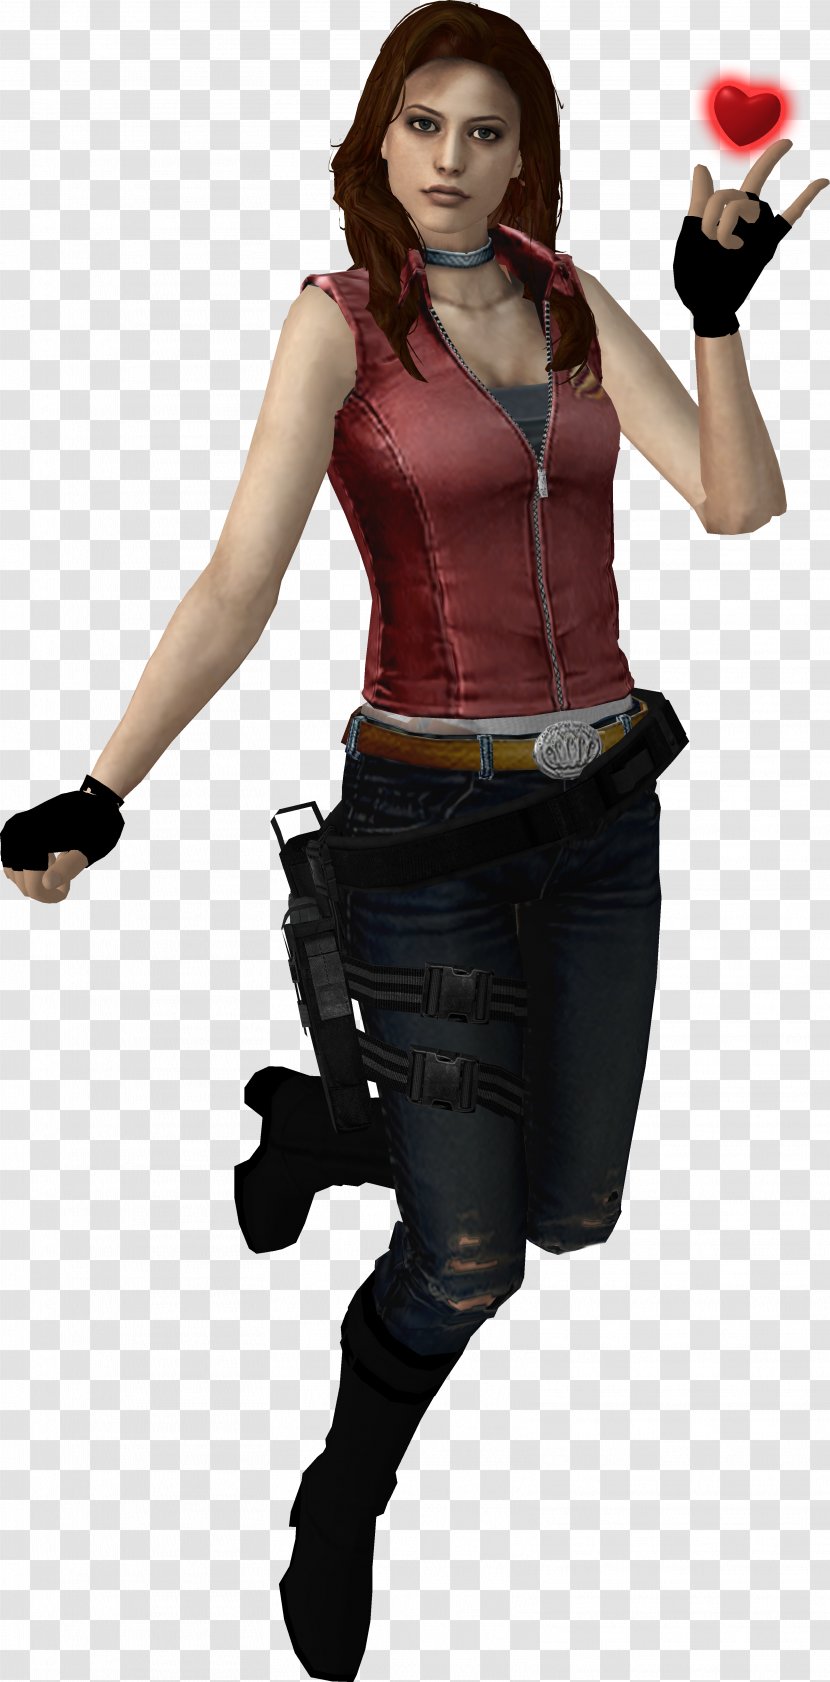 Milla Jovovich Claire Redfield Resident Evil 2 6 Evil: Revelations Transparent PNG